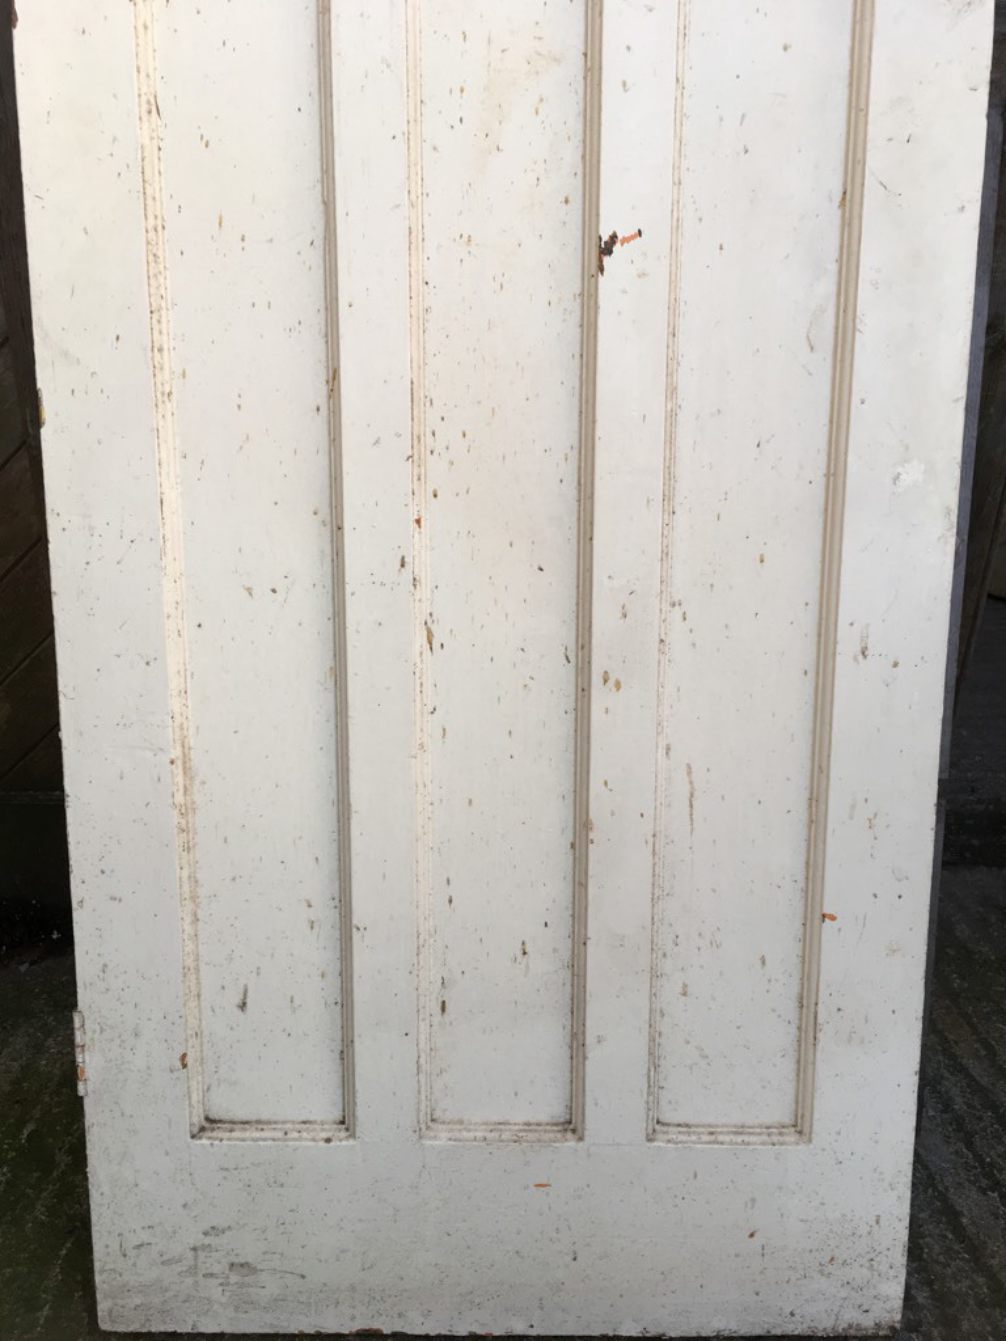 28 1/8”x75 3/4” 1930s Painted Pitch Pine Four Panel 1 Over 3 Internal Door